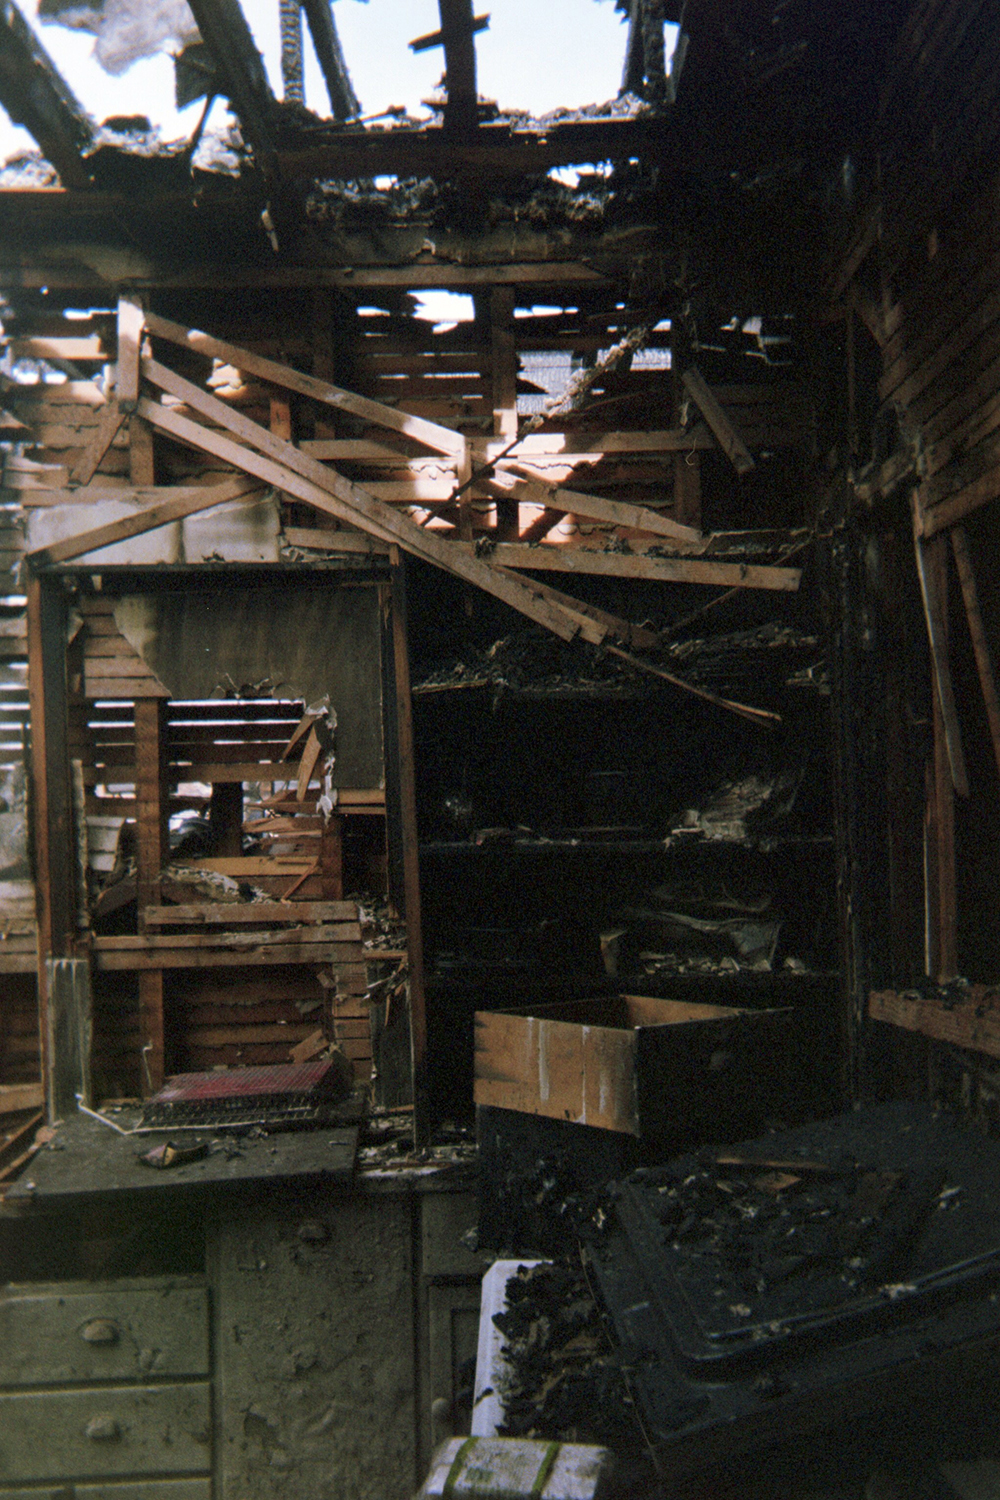 The charred remains of Patricia's kitchen